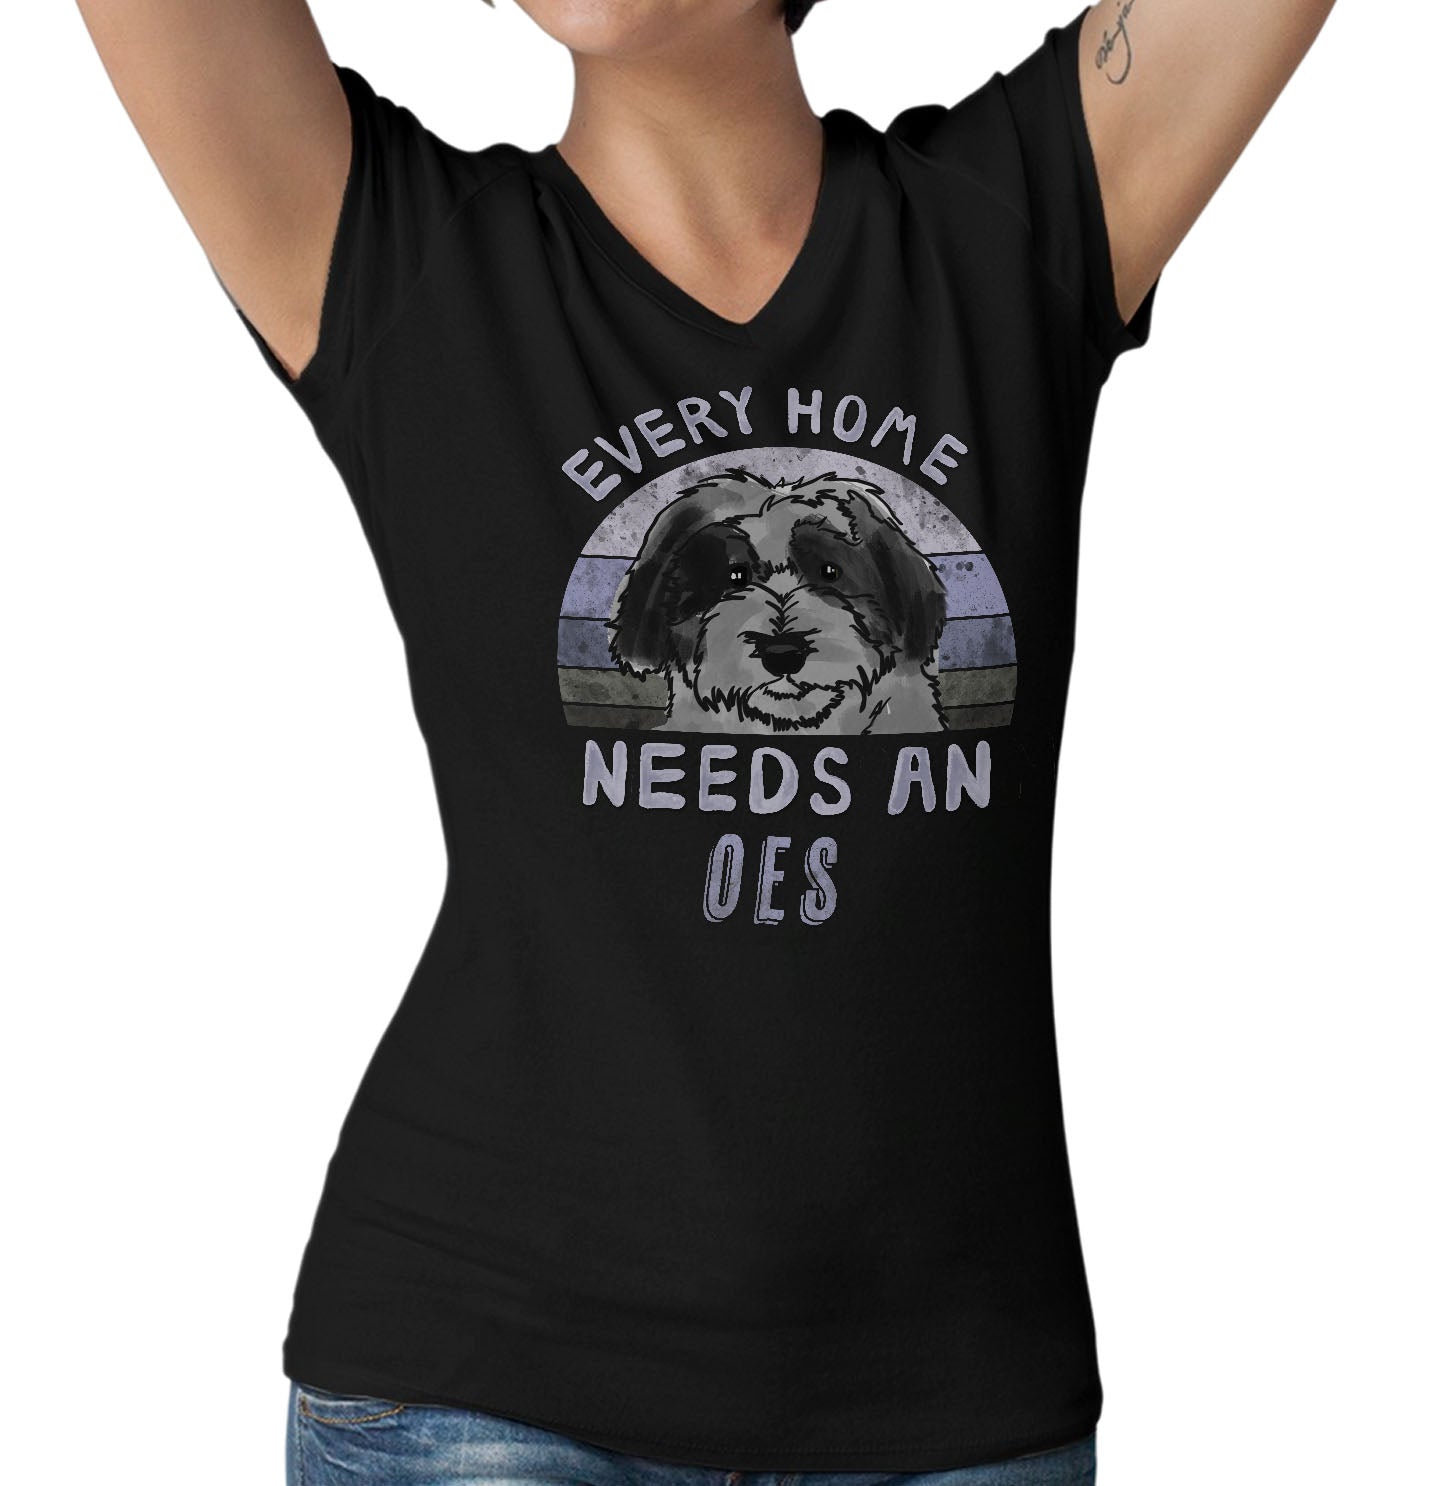 Every Home Needs a Old English Sheepdog - Women's V-Neck T-Shirt